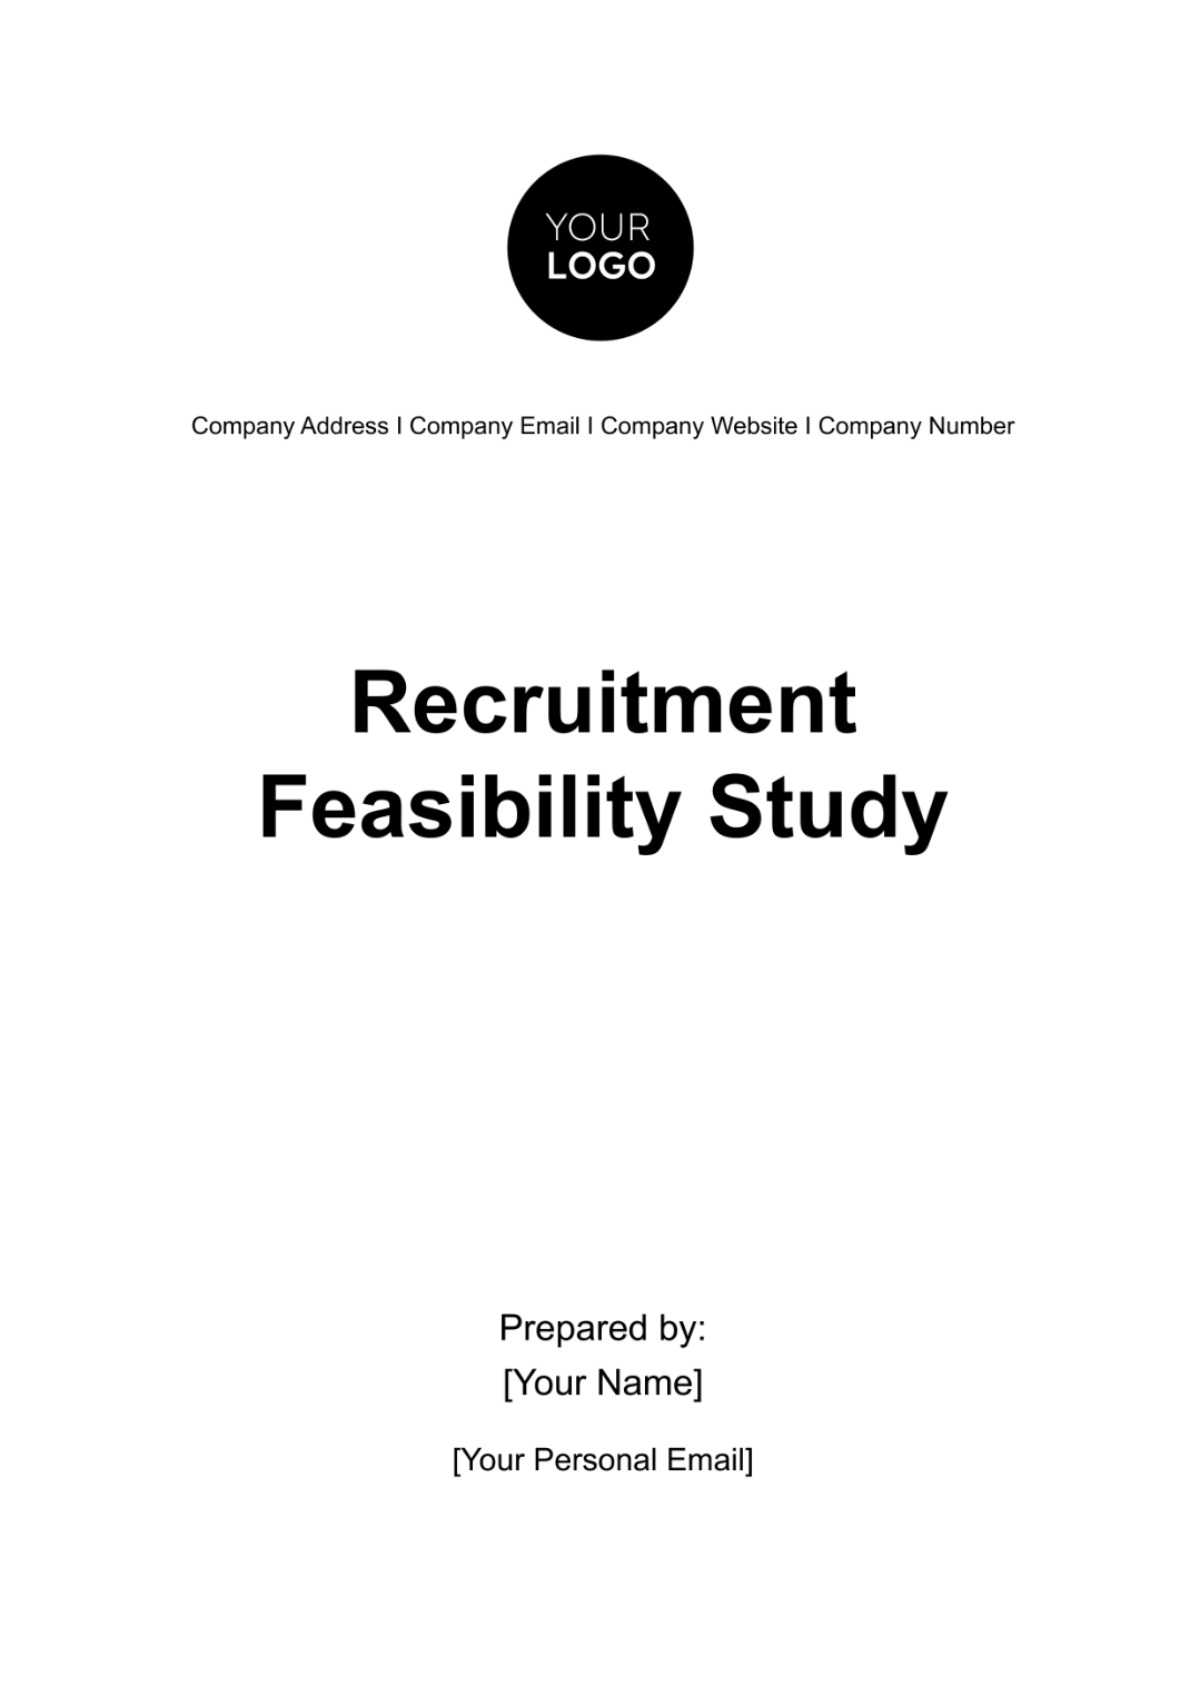 Free Recruitment Feasibility Study HR Template